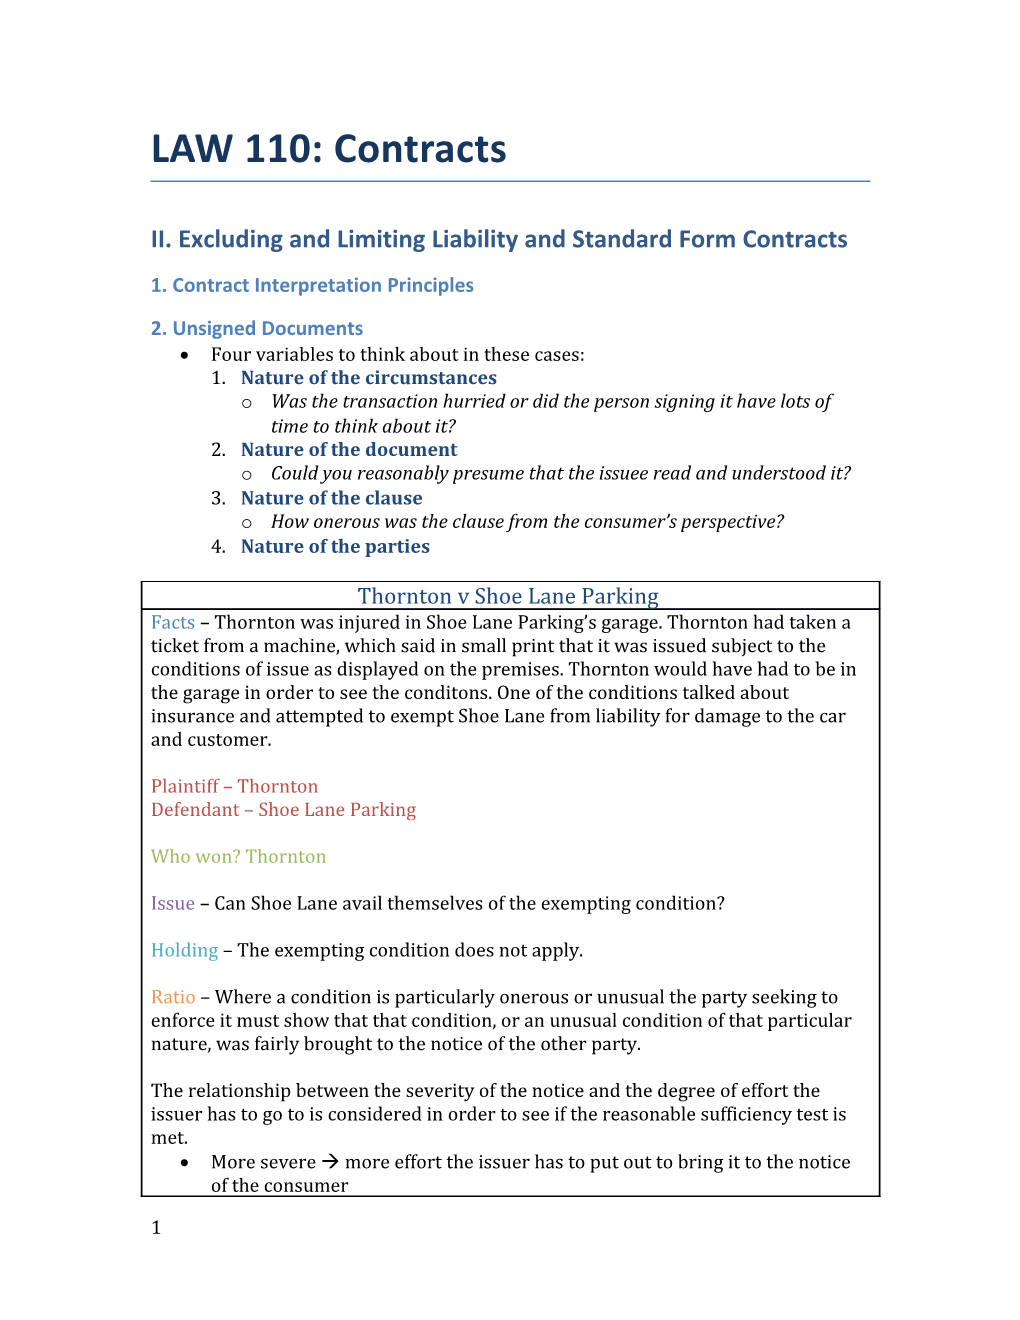 II. Excluding and Limiting Liability and Standard Form Contracts